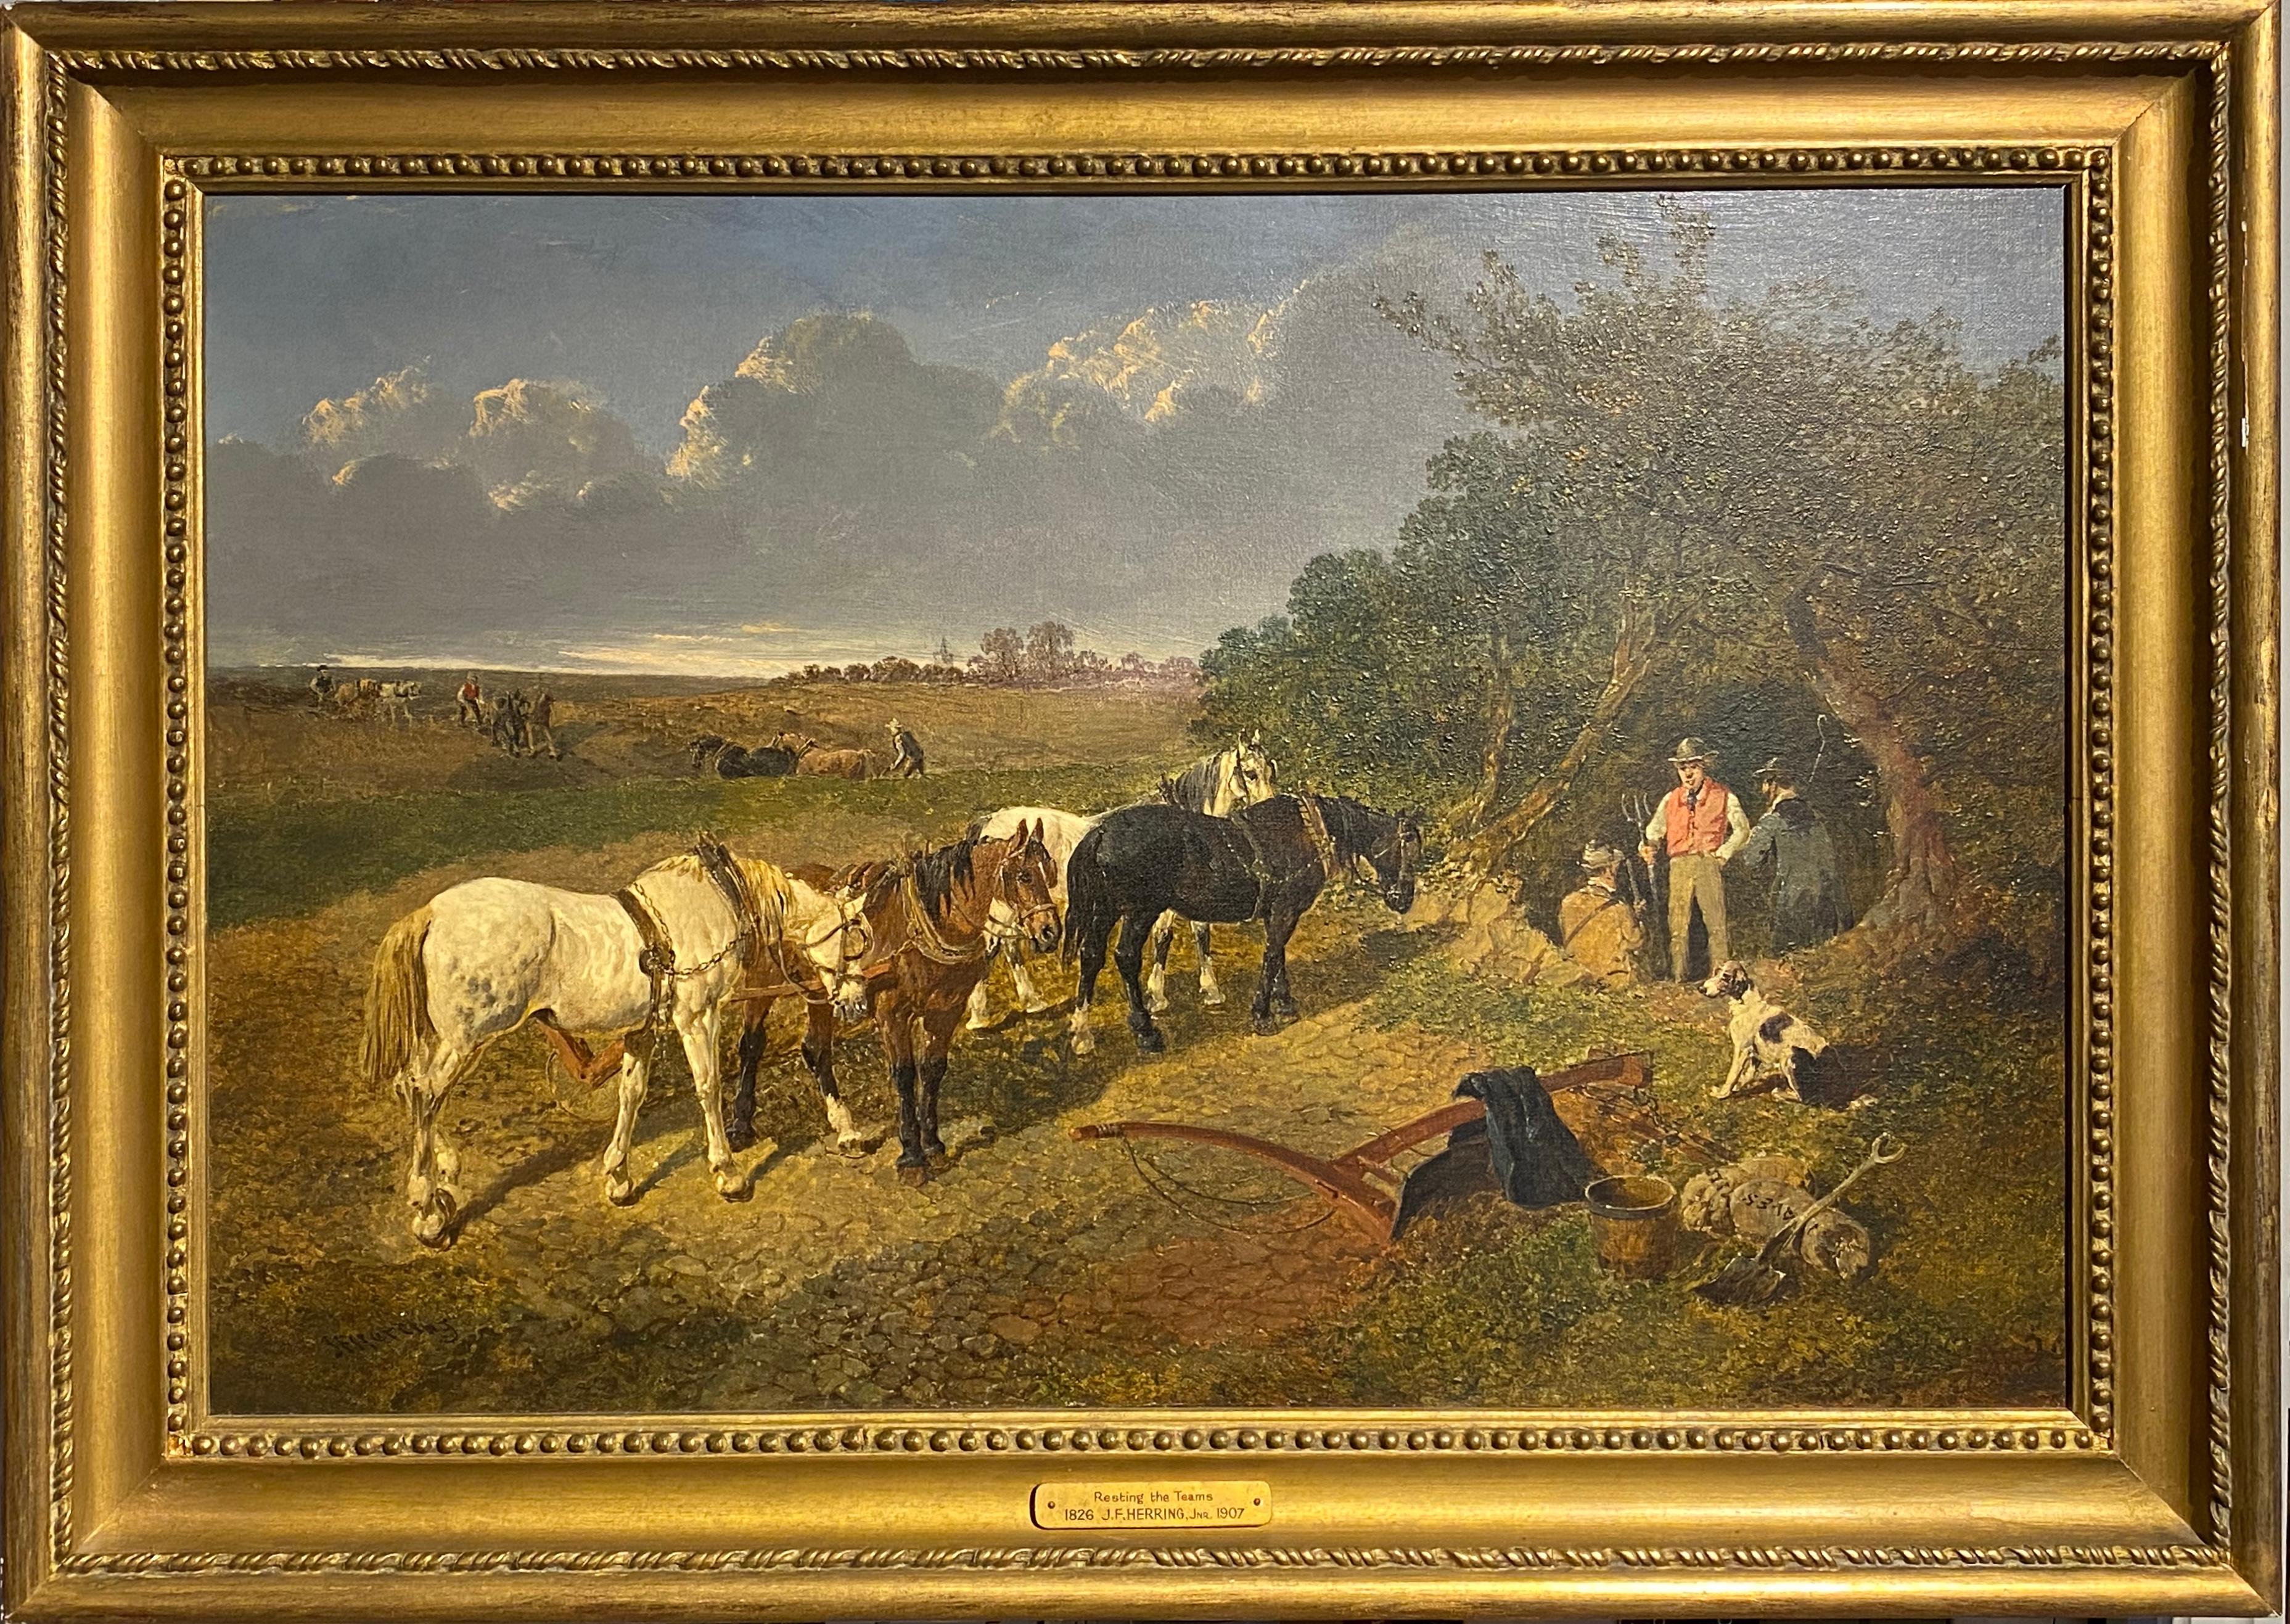 John Frederick Herring Jr. Animal Painting - "Resting the team" - A plough team, with horses in a landscape